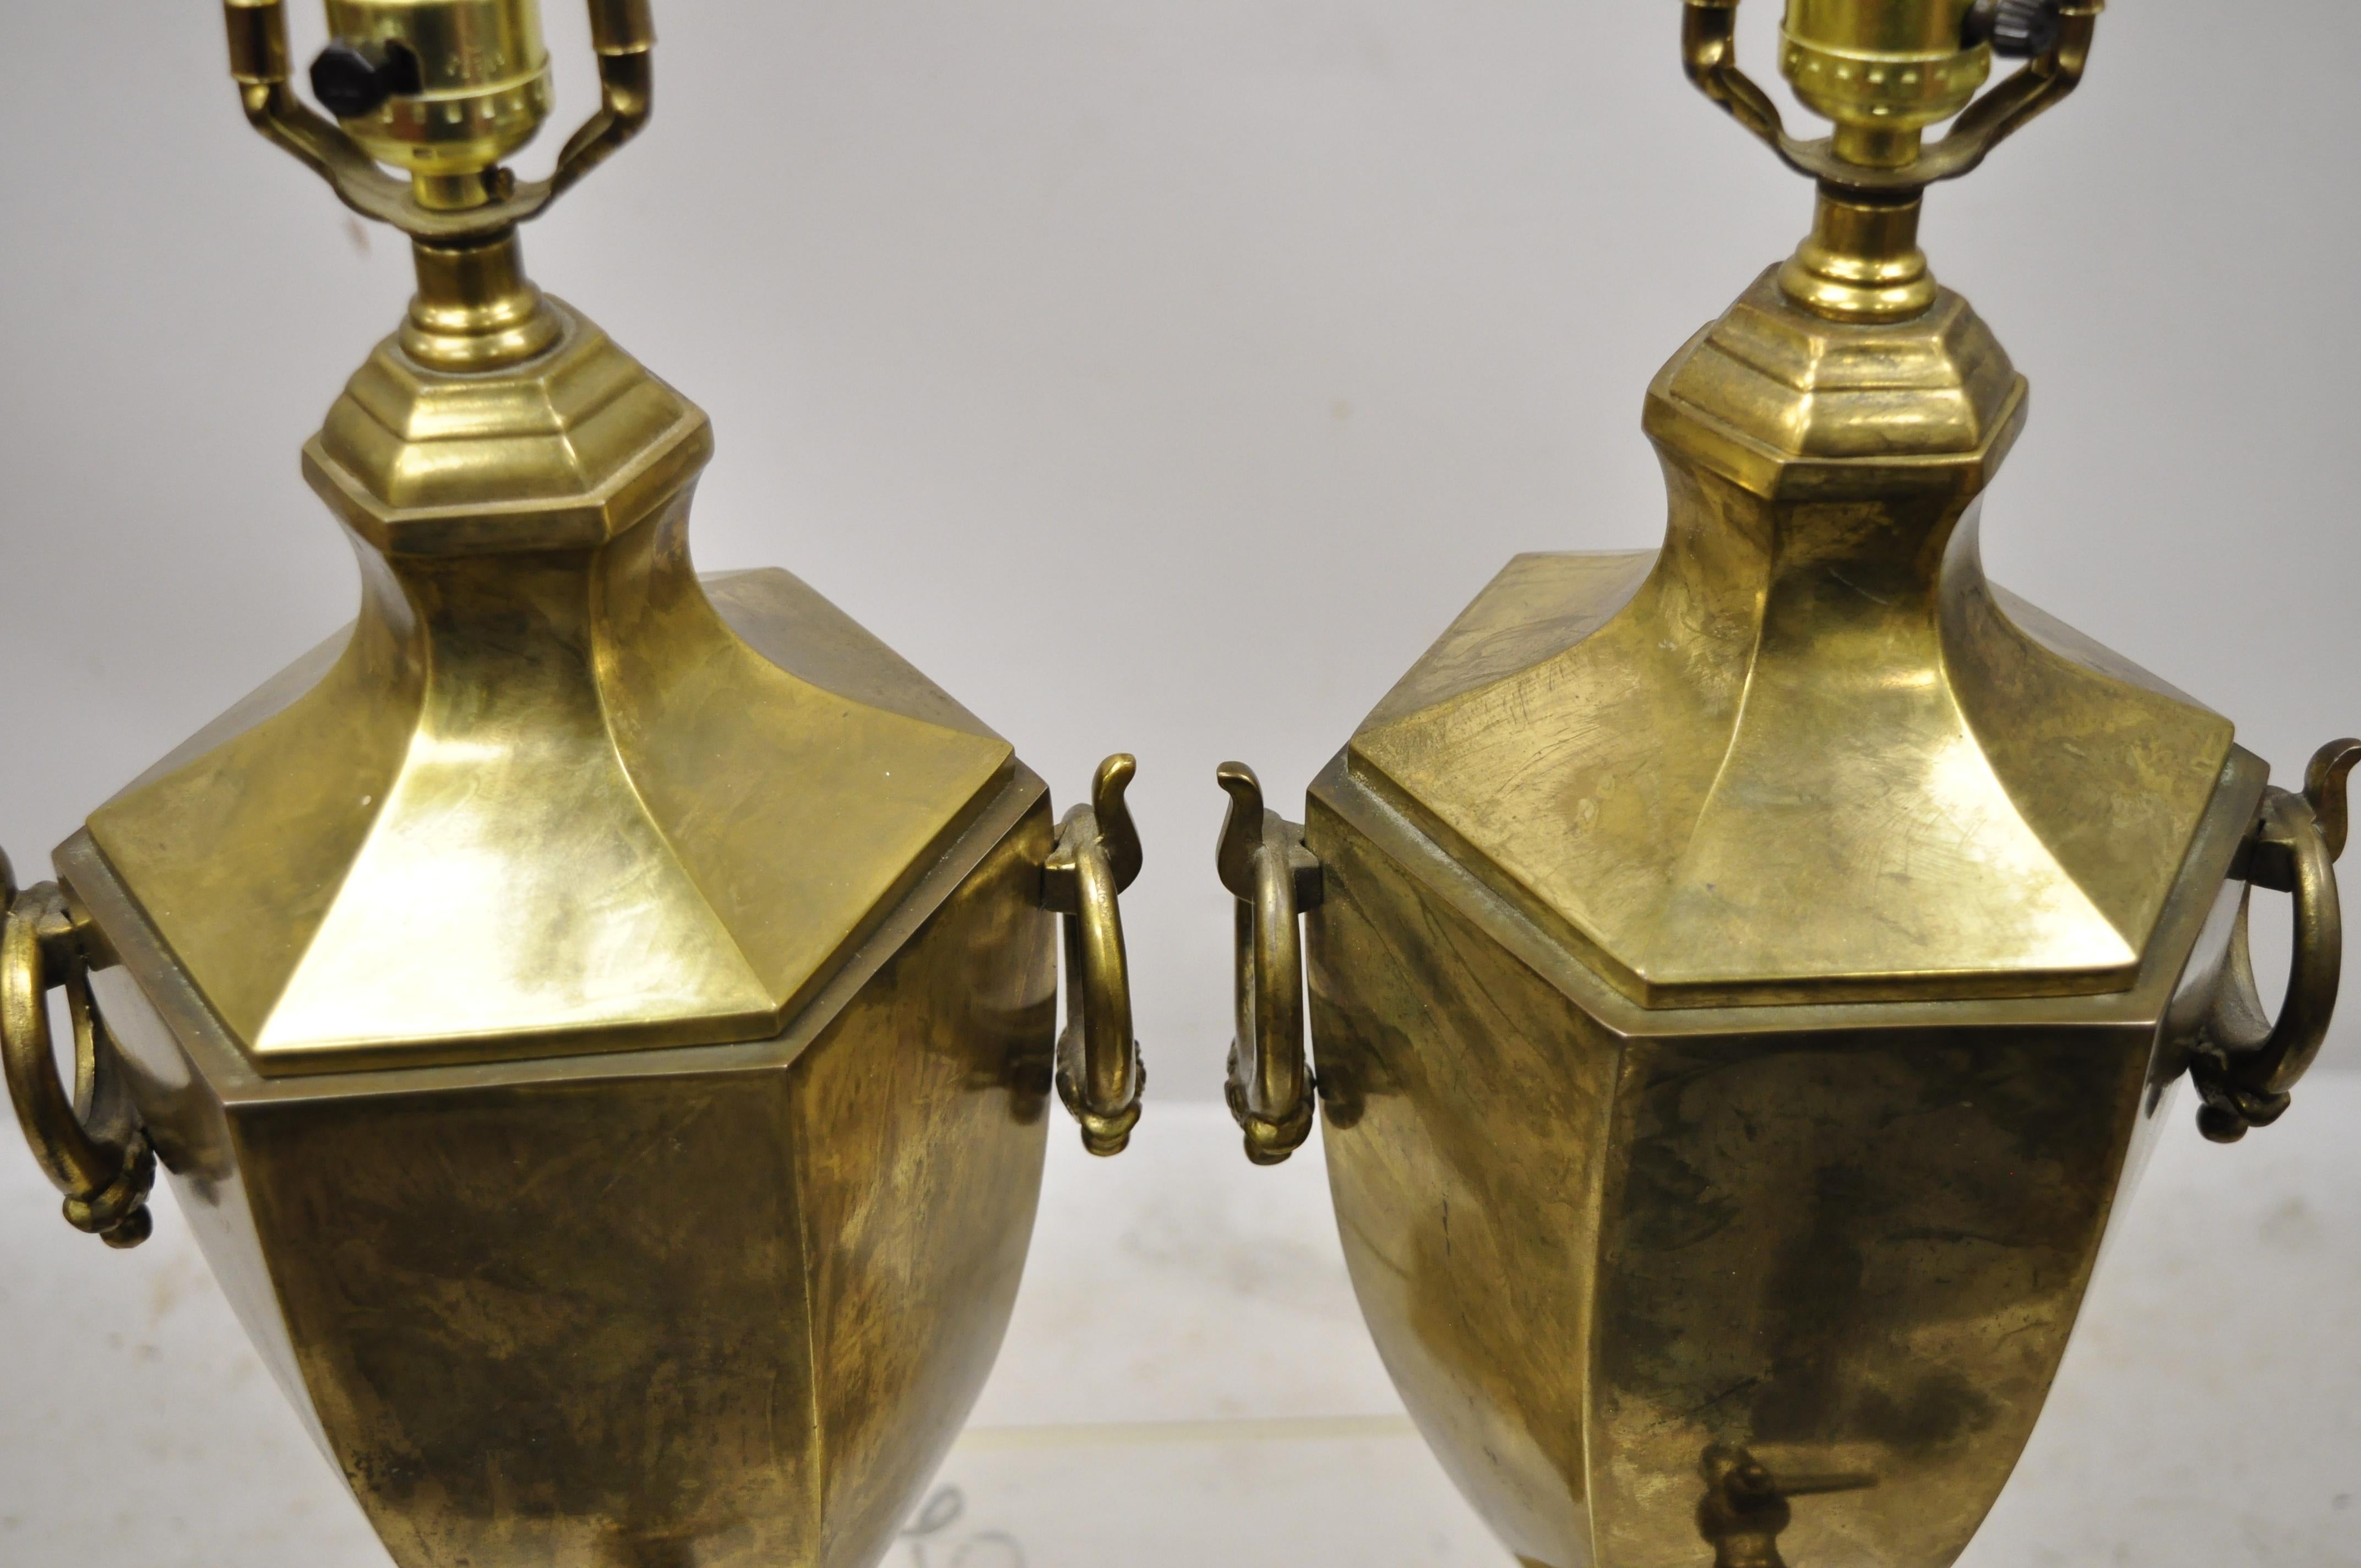 Paul Hanson Burnished Brass Samovar Urn Form Table Lamps with Shades - a Pair For Sale 3